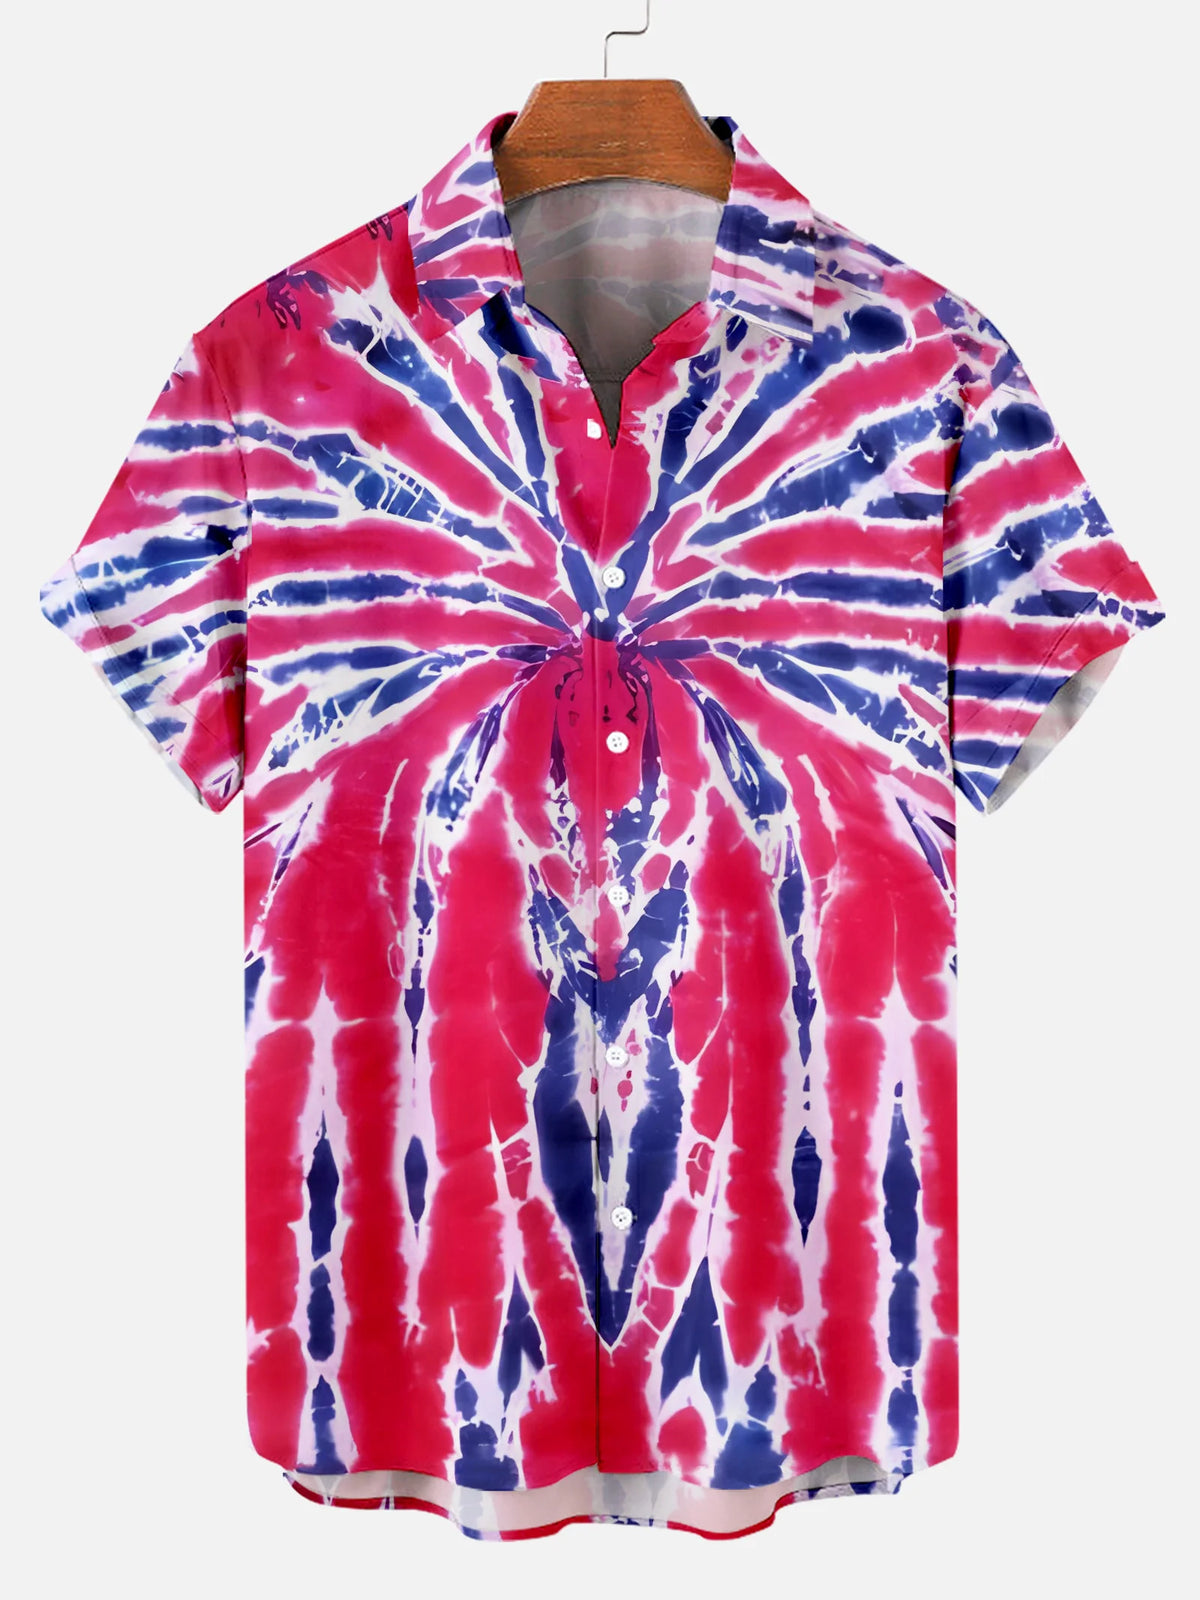 Men's blue and red Tie Dye Printed Plus Size Short Sleeve Shirt